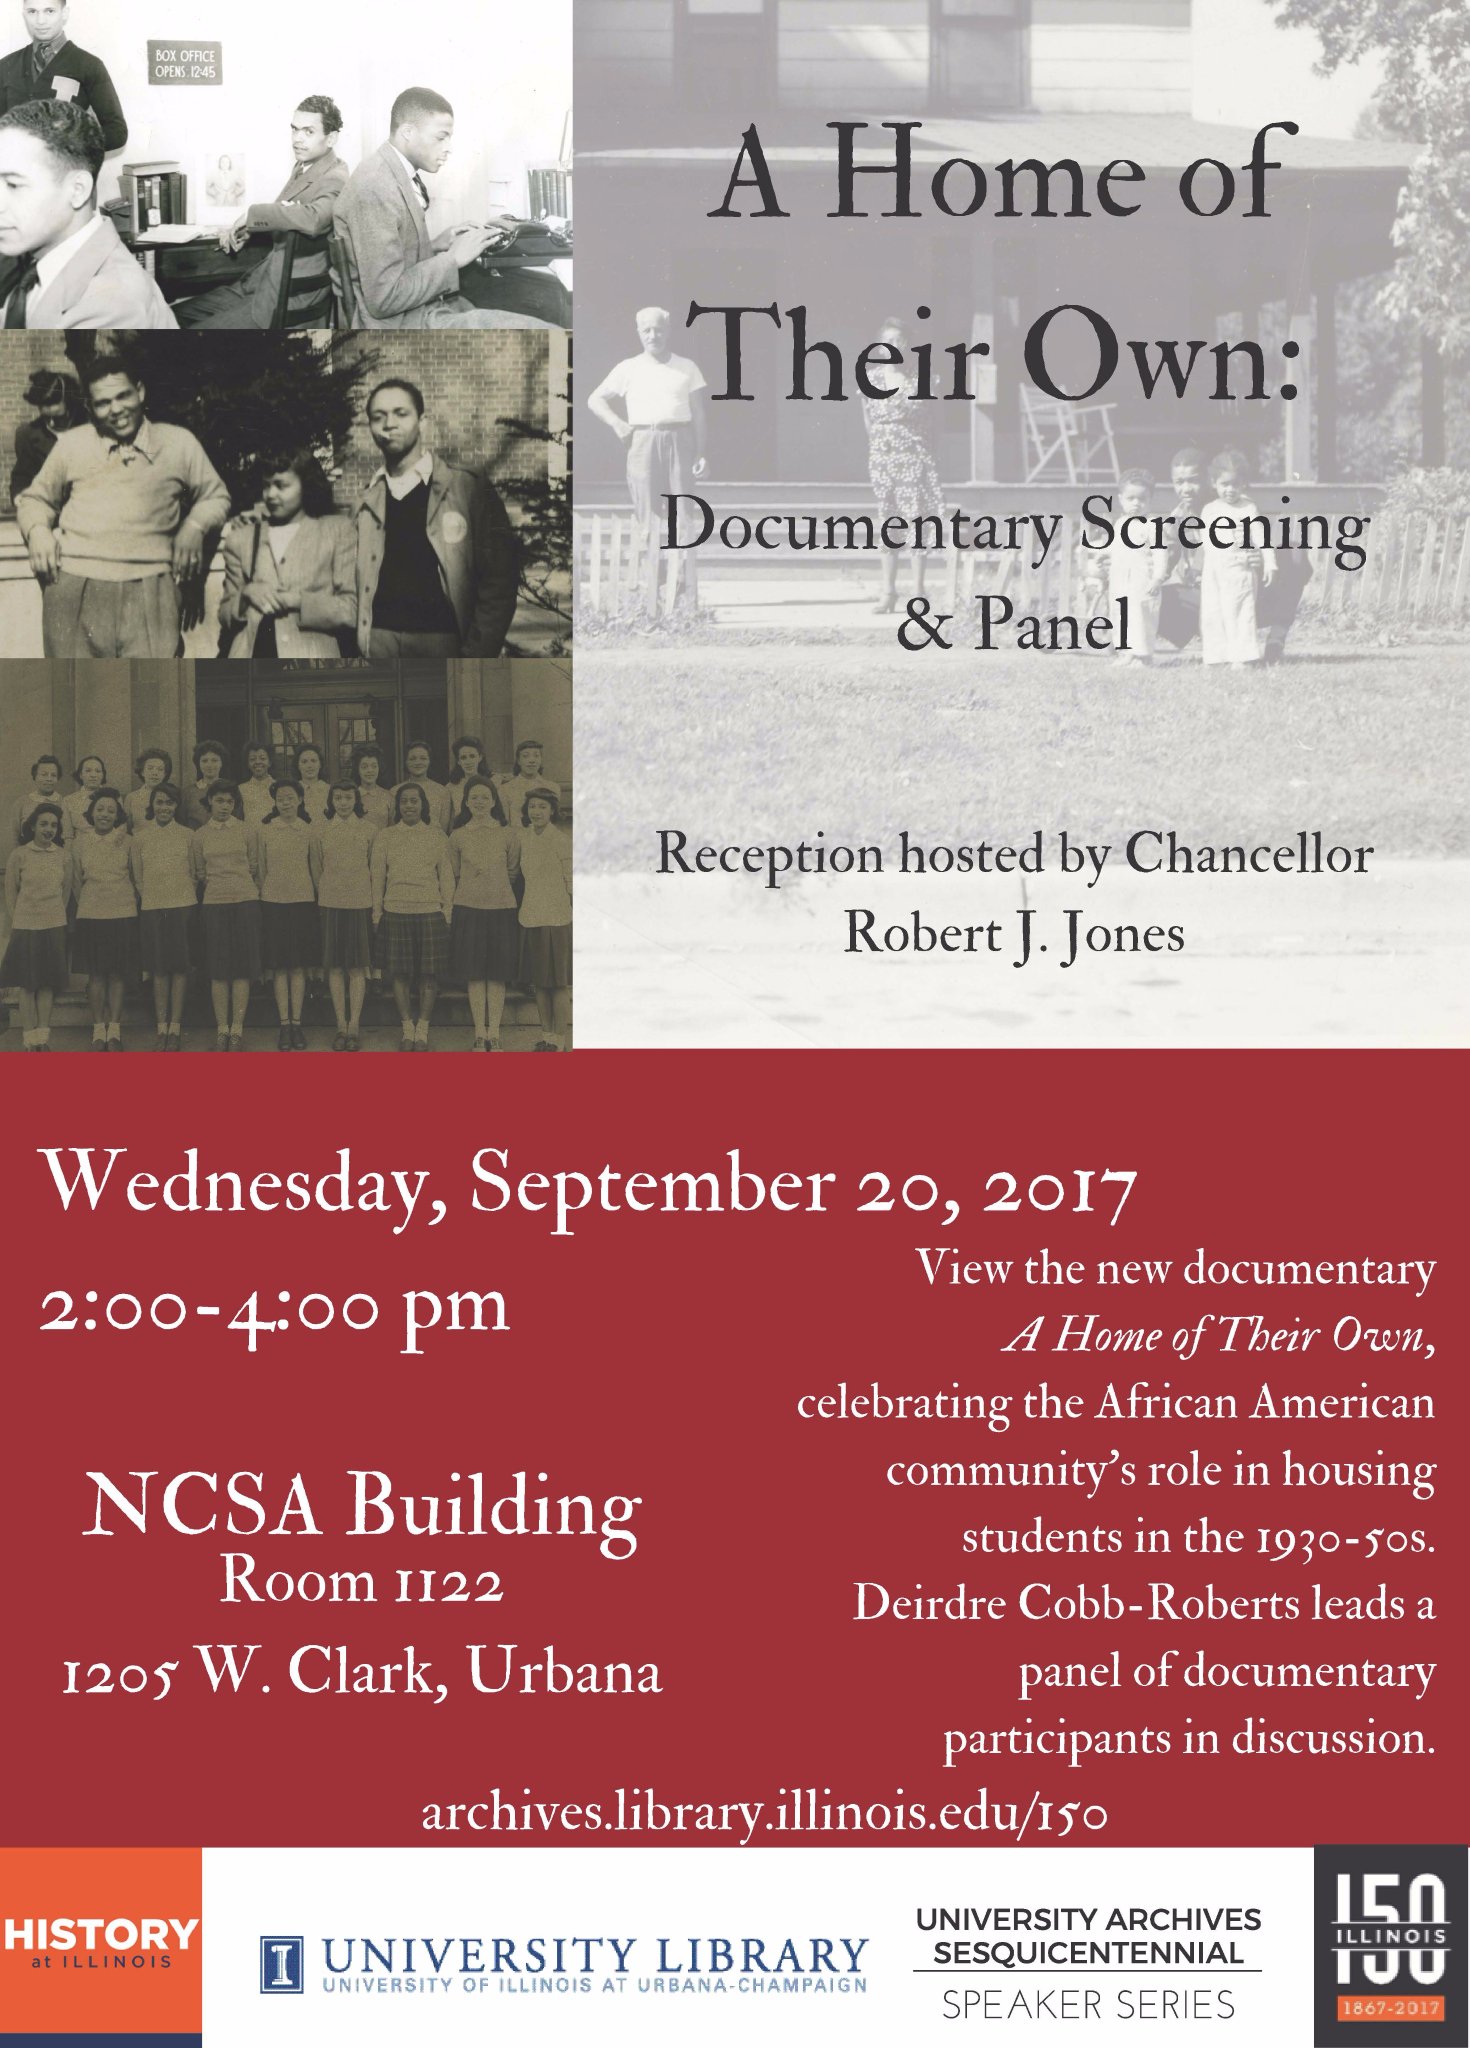 Poster for forthcoming event with historical images of African-American students.